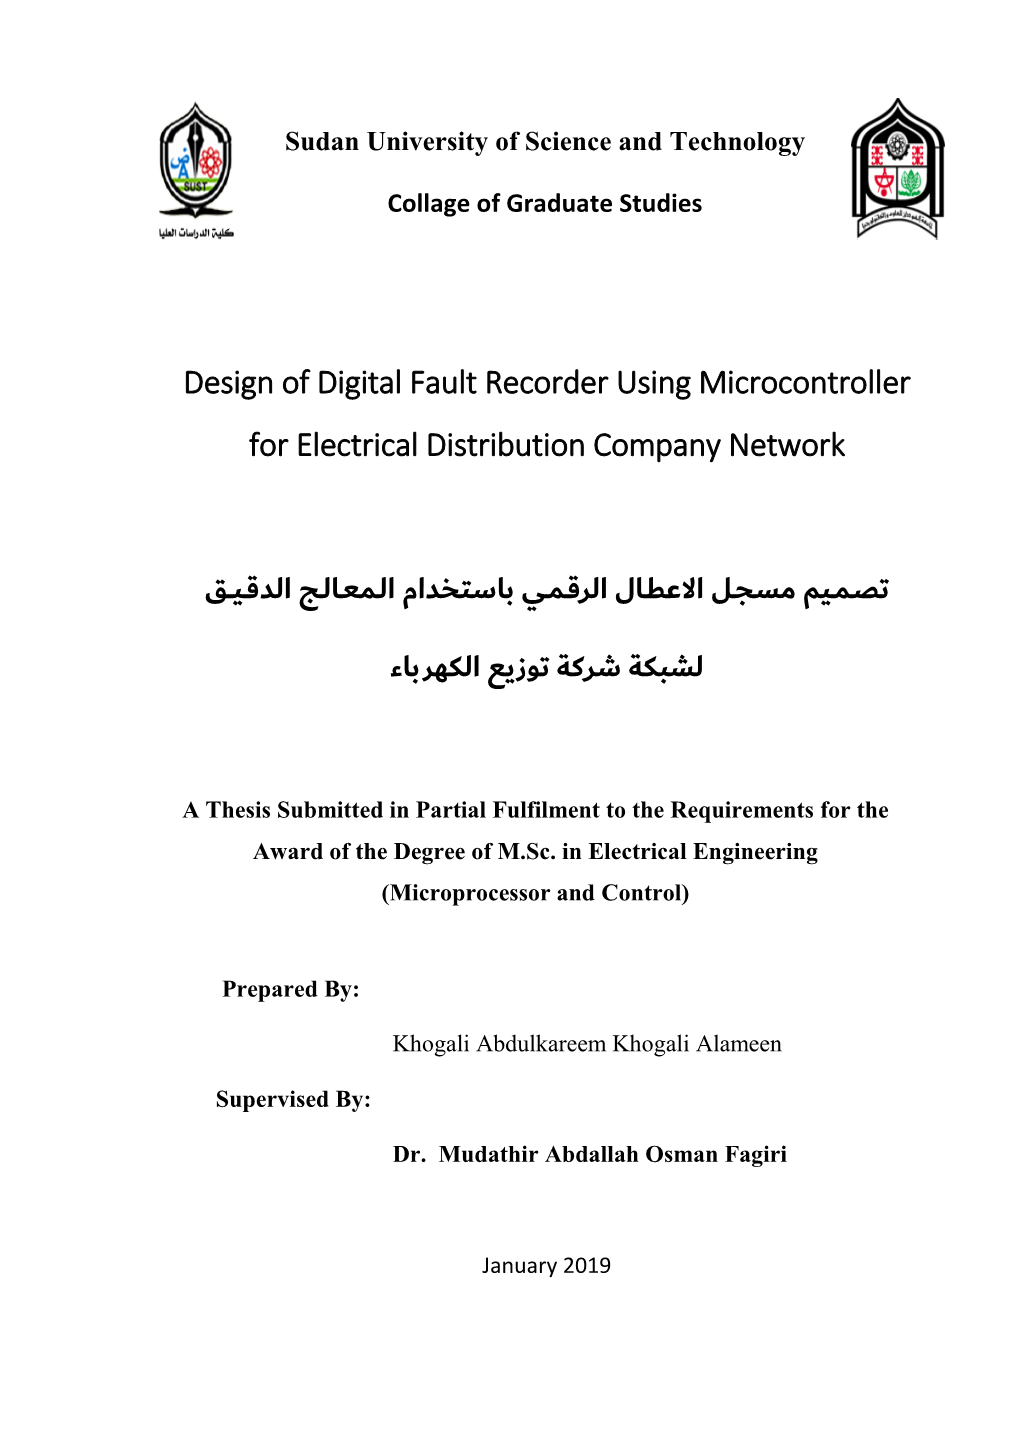 Design of Digital Fault Recorder Using Microcontroller for Electrical Distribution Company Network